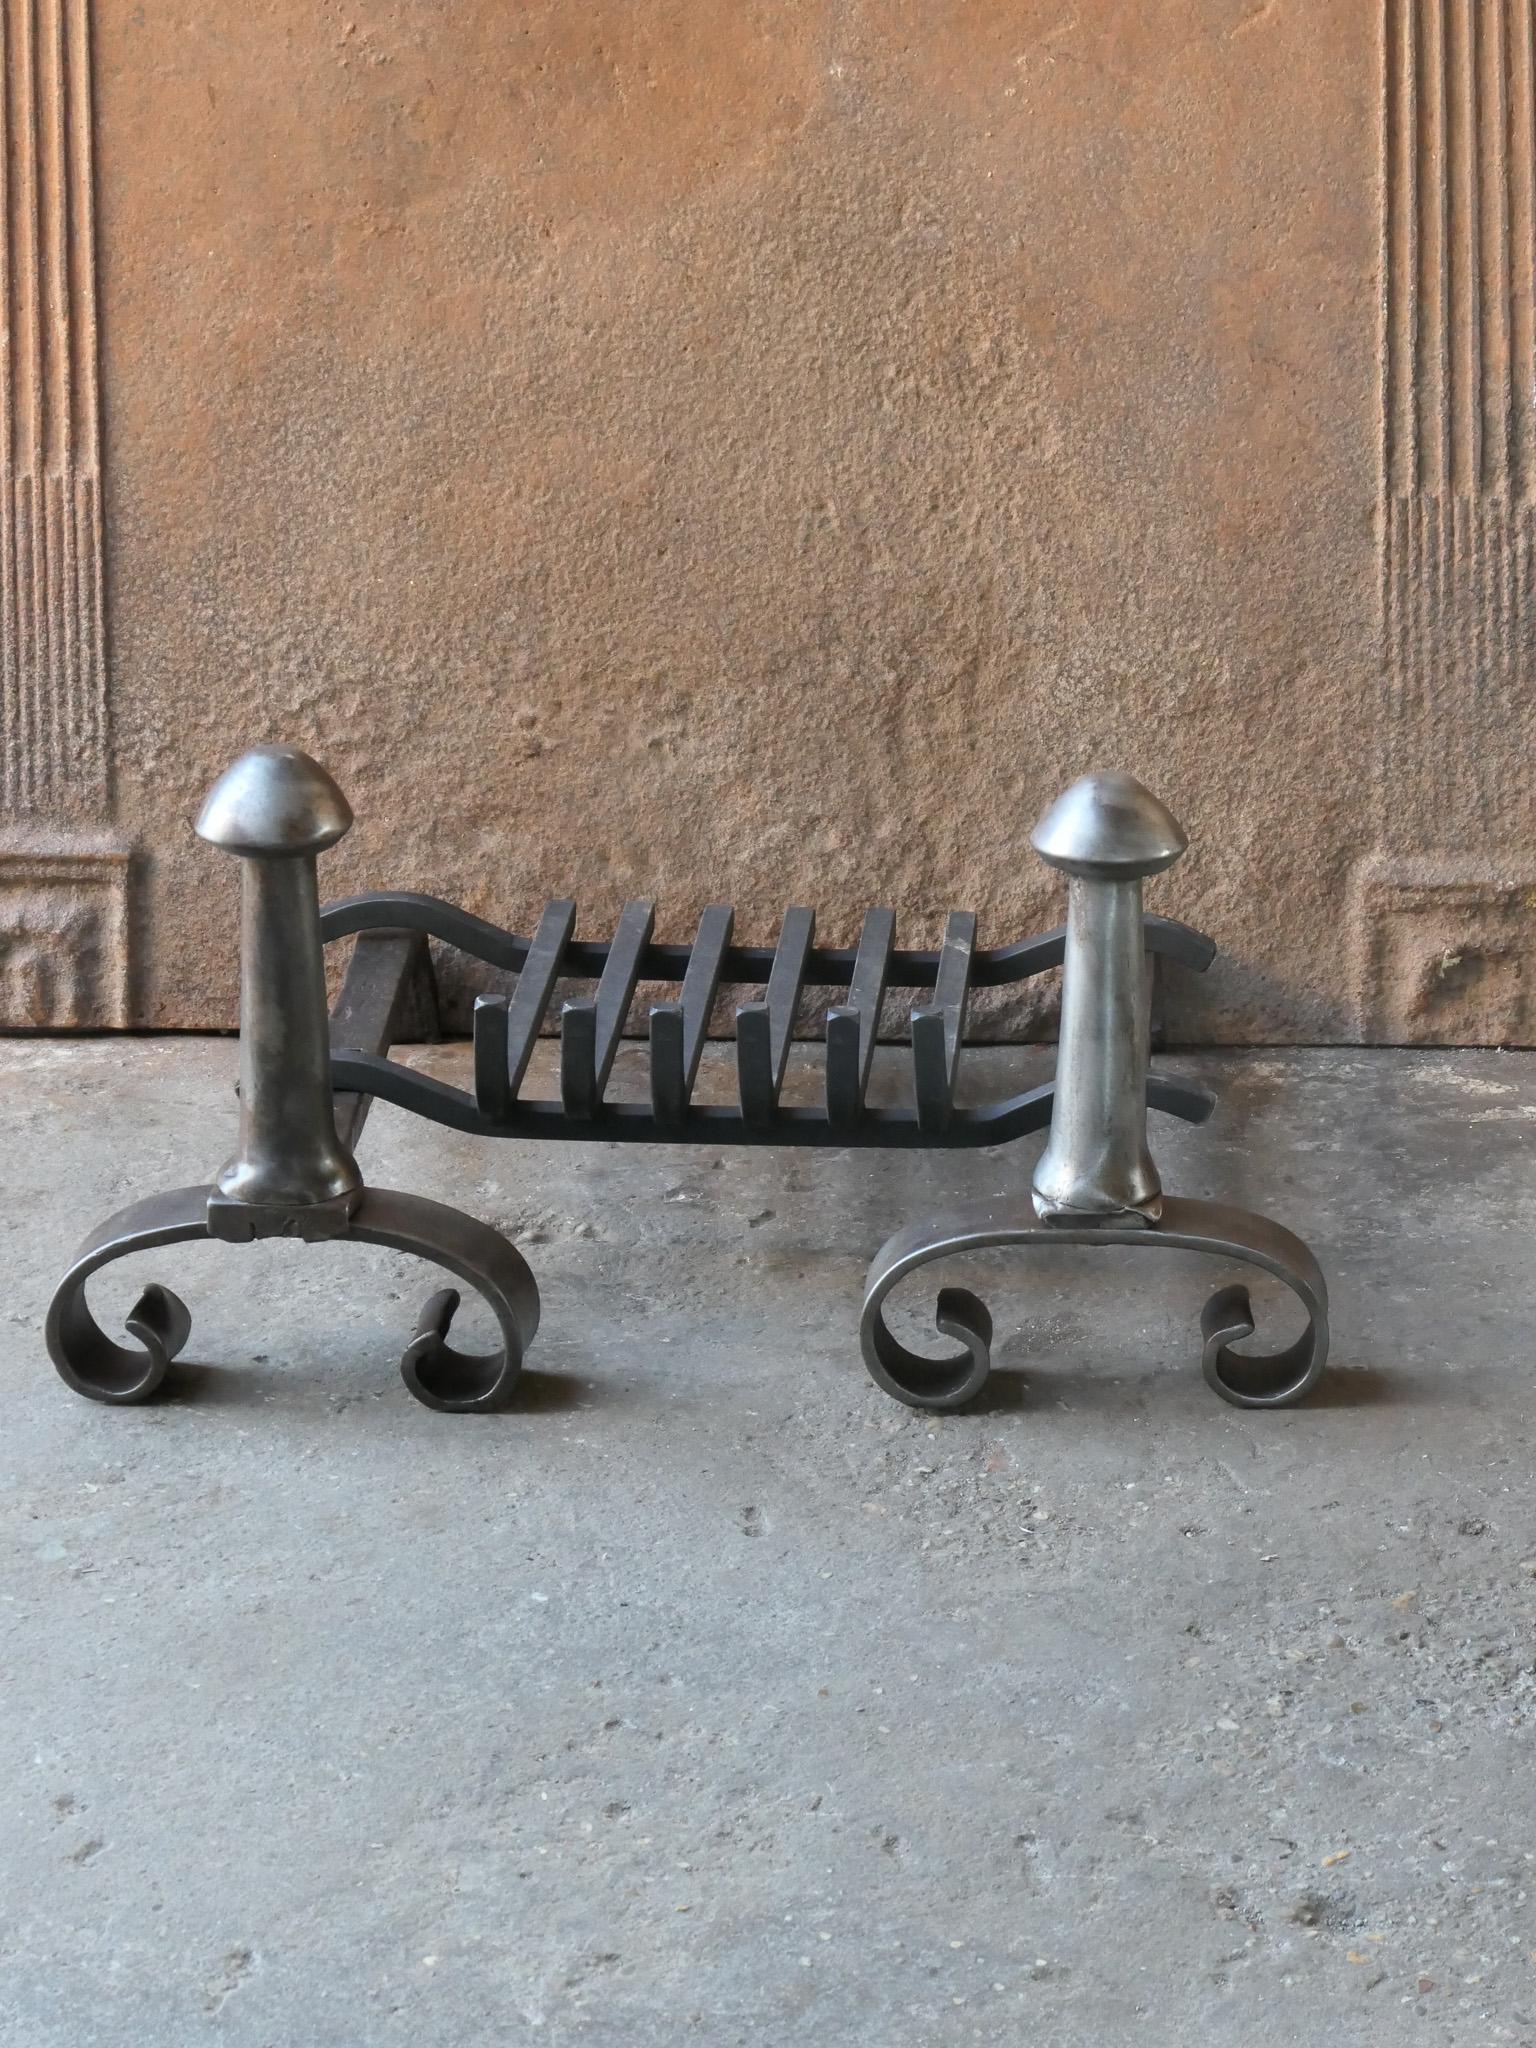 19th century French Napoleon III fireplace grate, made of wrought iron. The basket is in a good condition and is fully functional.

Width at front is 64.5 cm (25.4 inches).